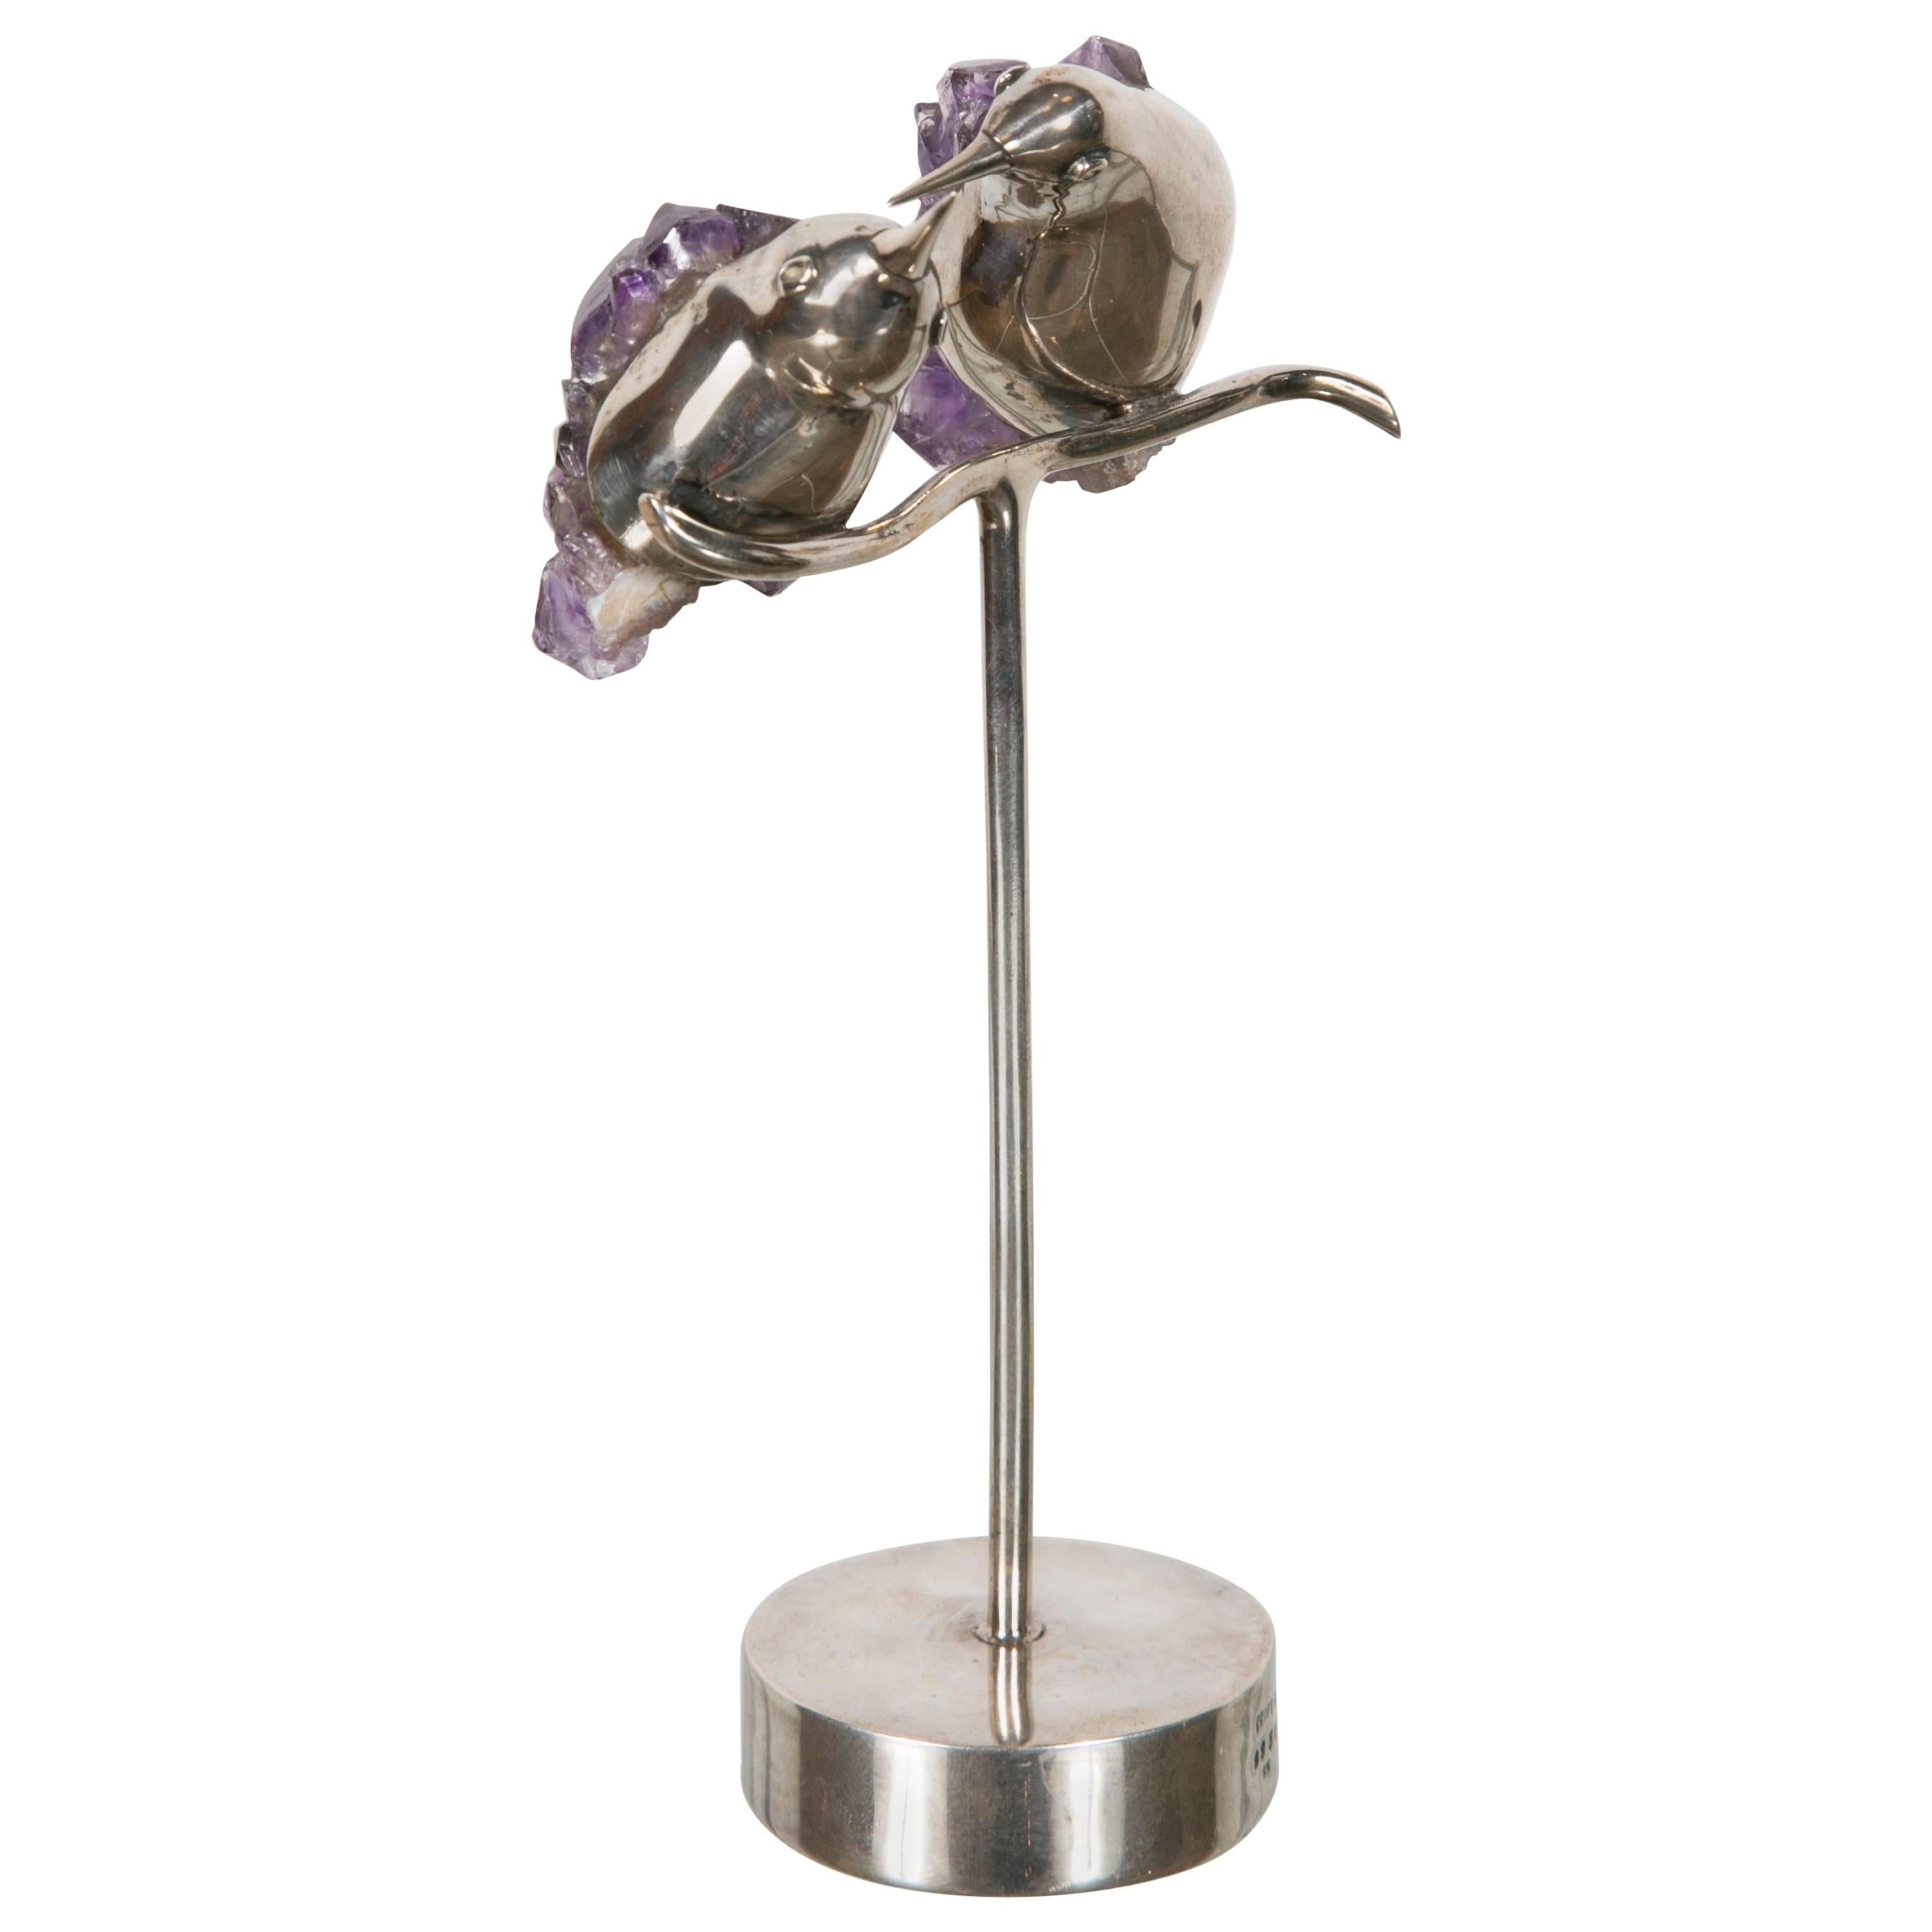 Charming Pair of Silver and Amethyst Hummingbird Perched on a Stem